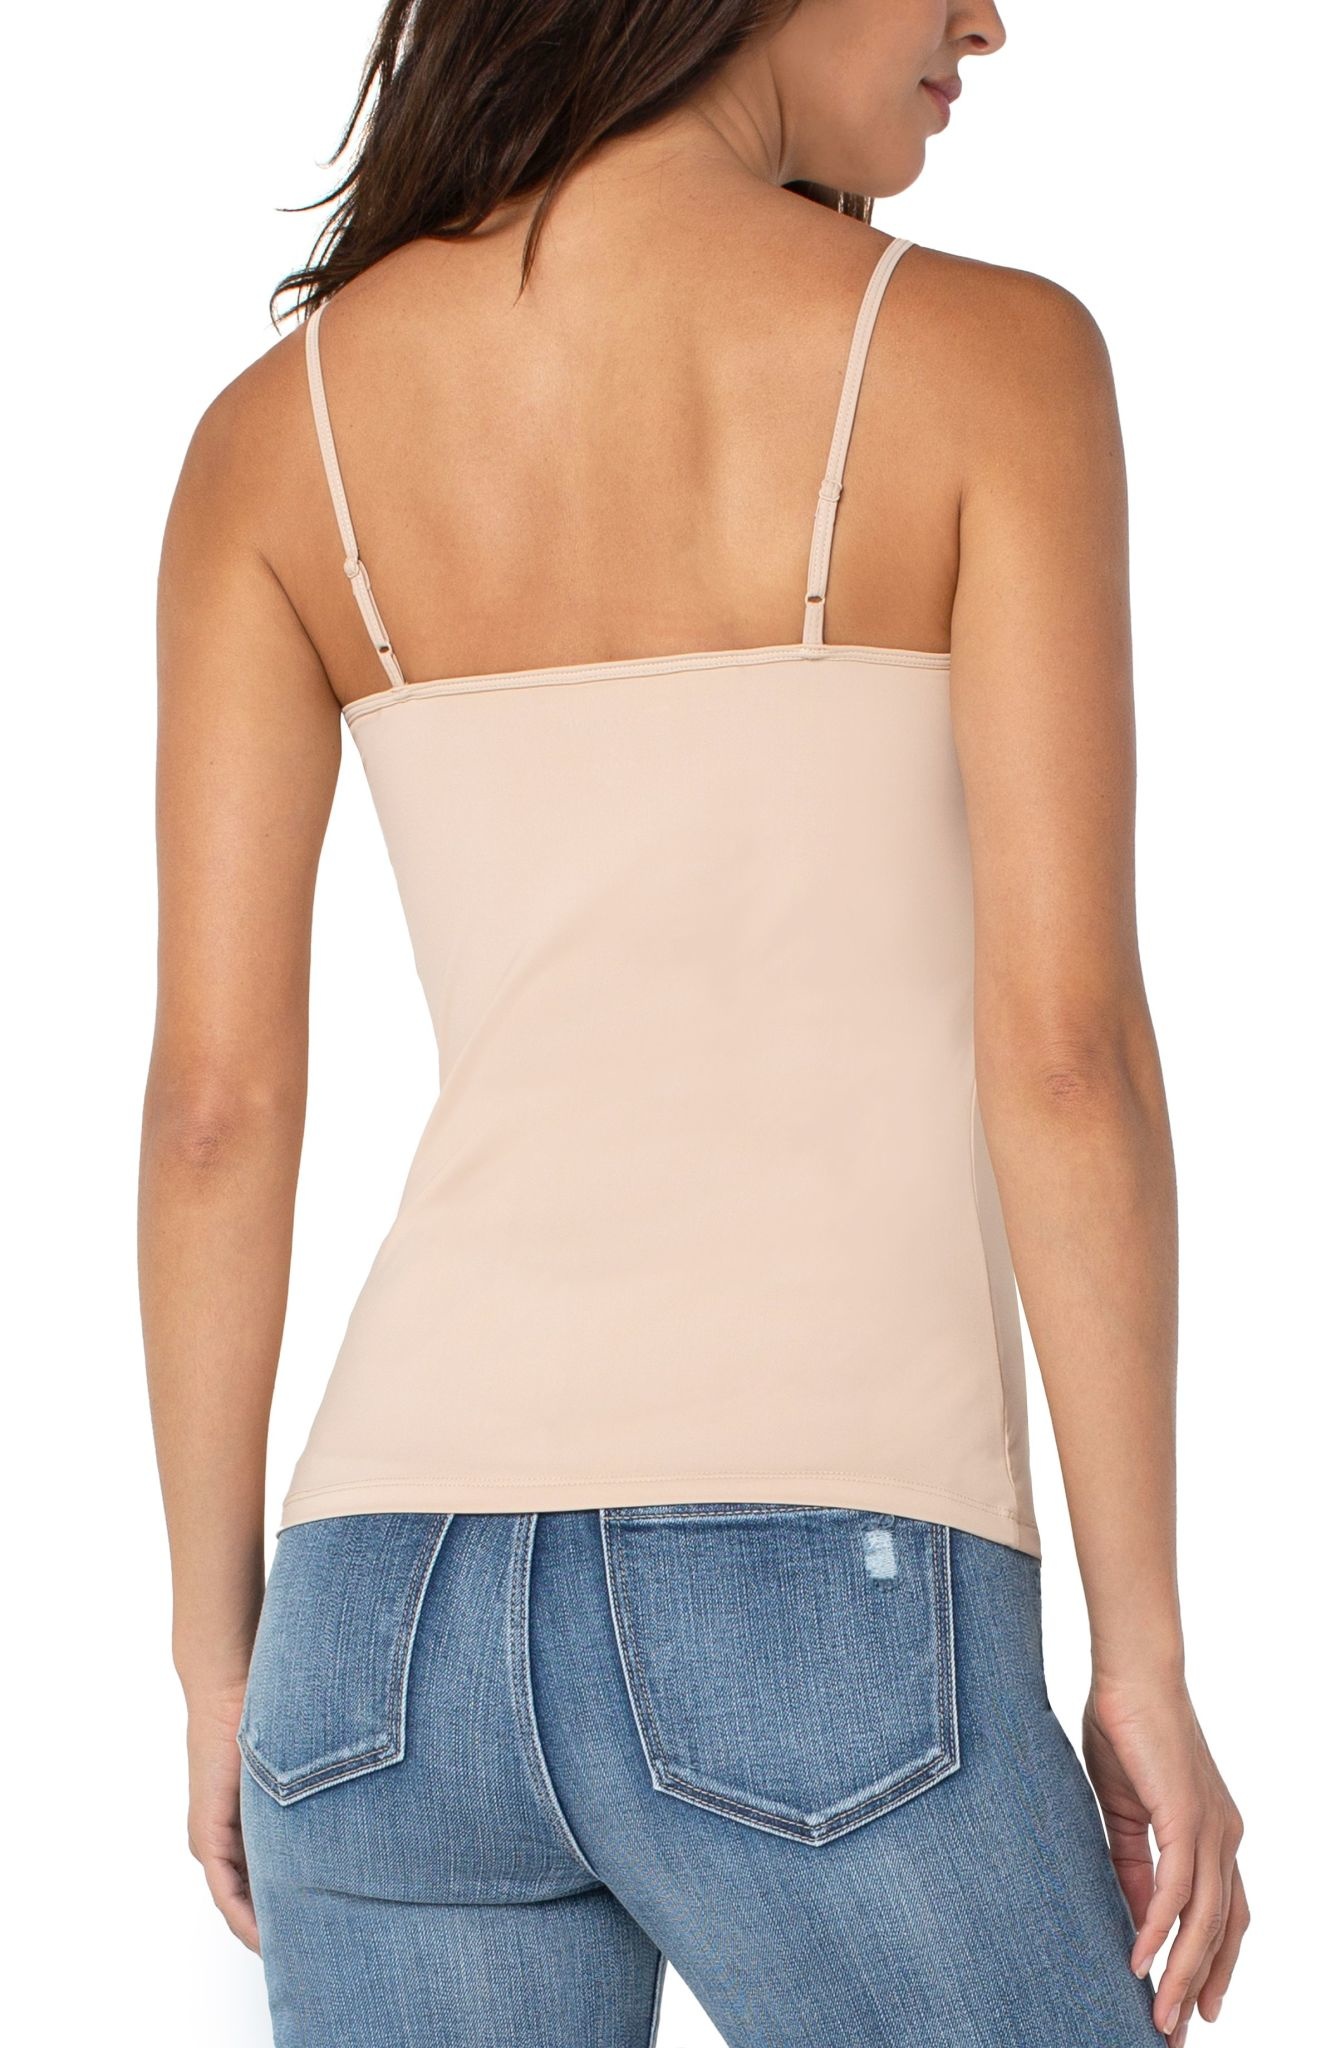 Liverpool Jeans Knit Camisole Top Nude - Alexandrite Active & Golf Wear